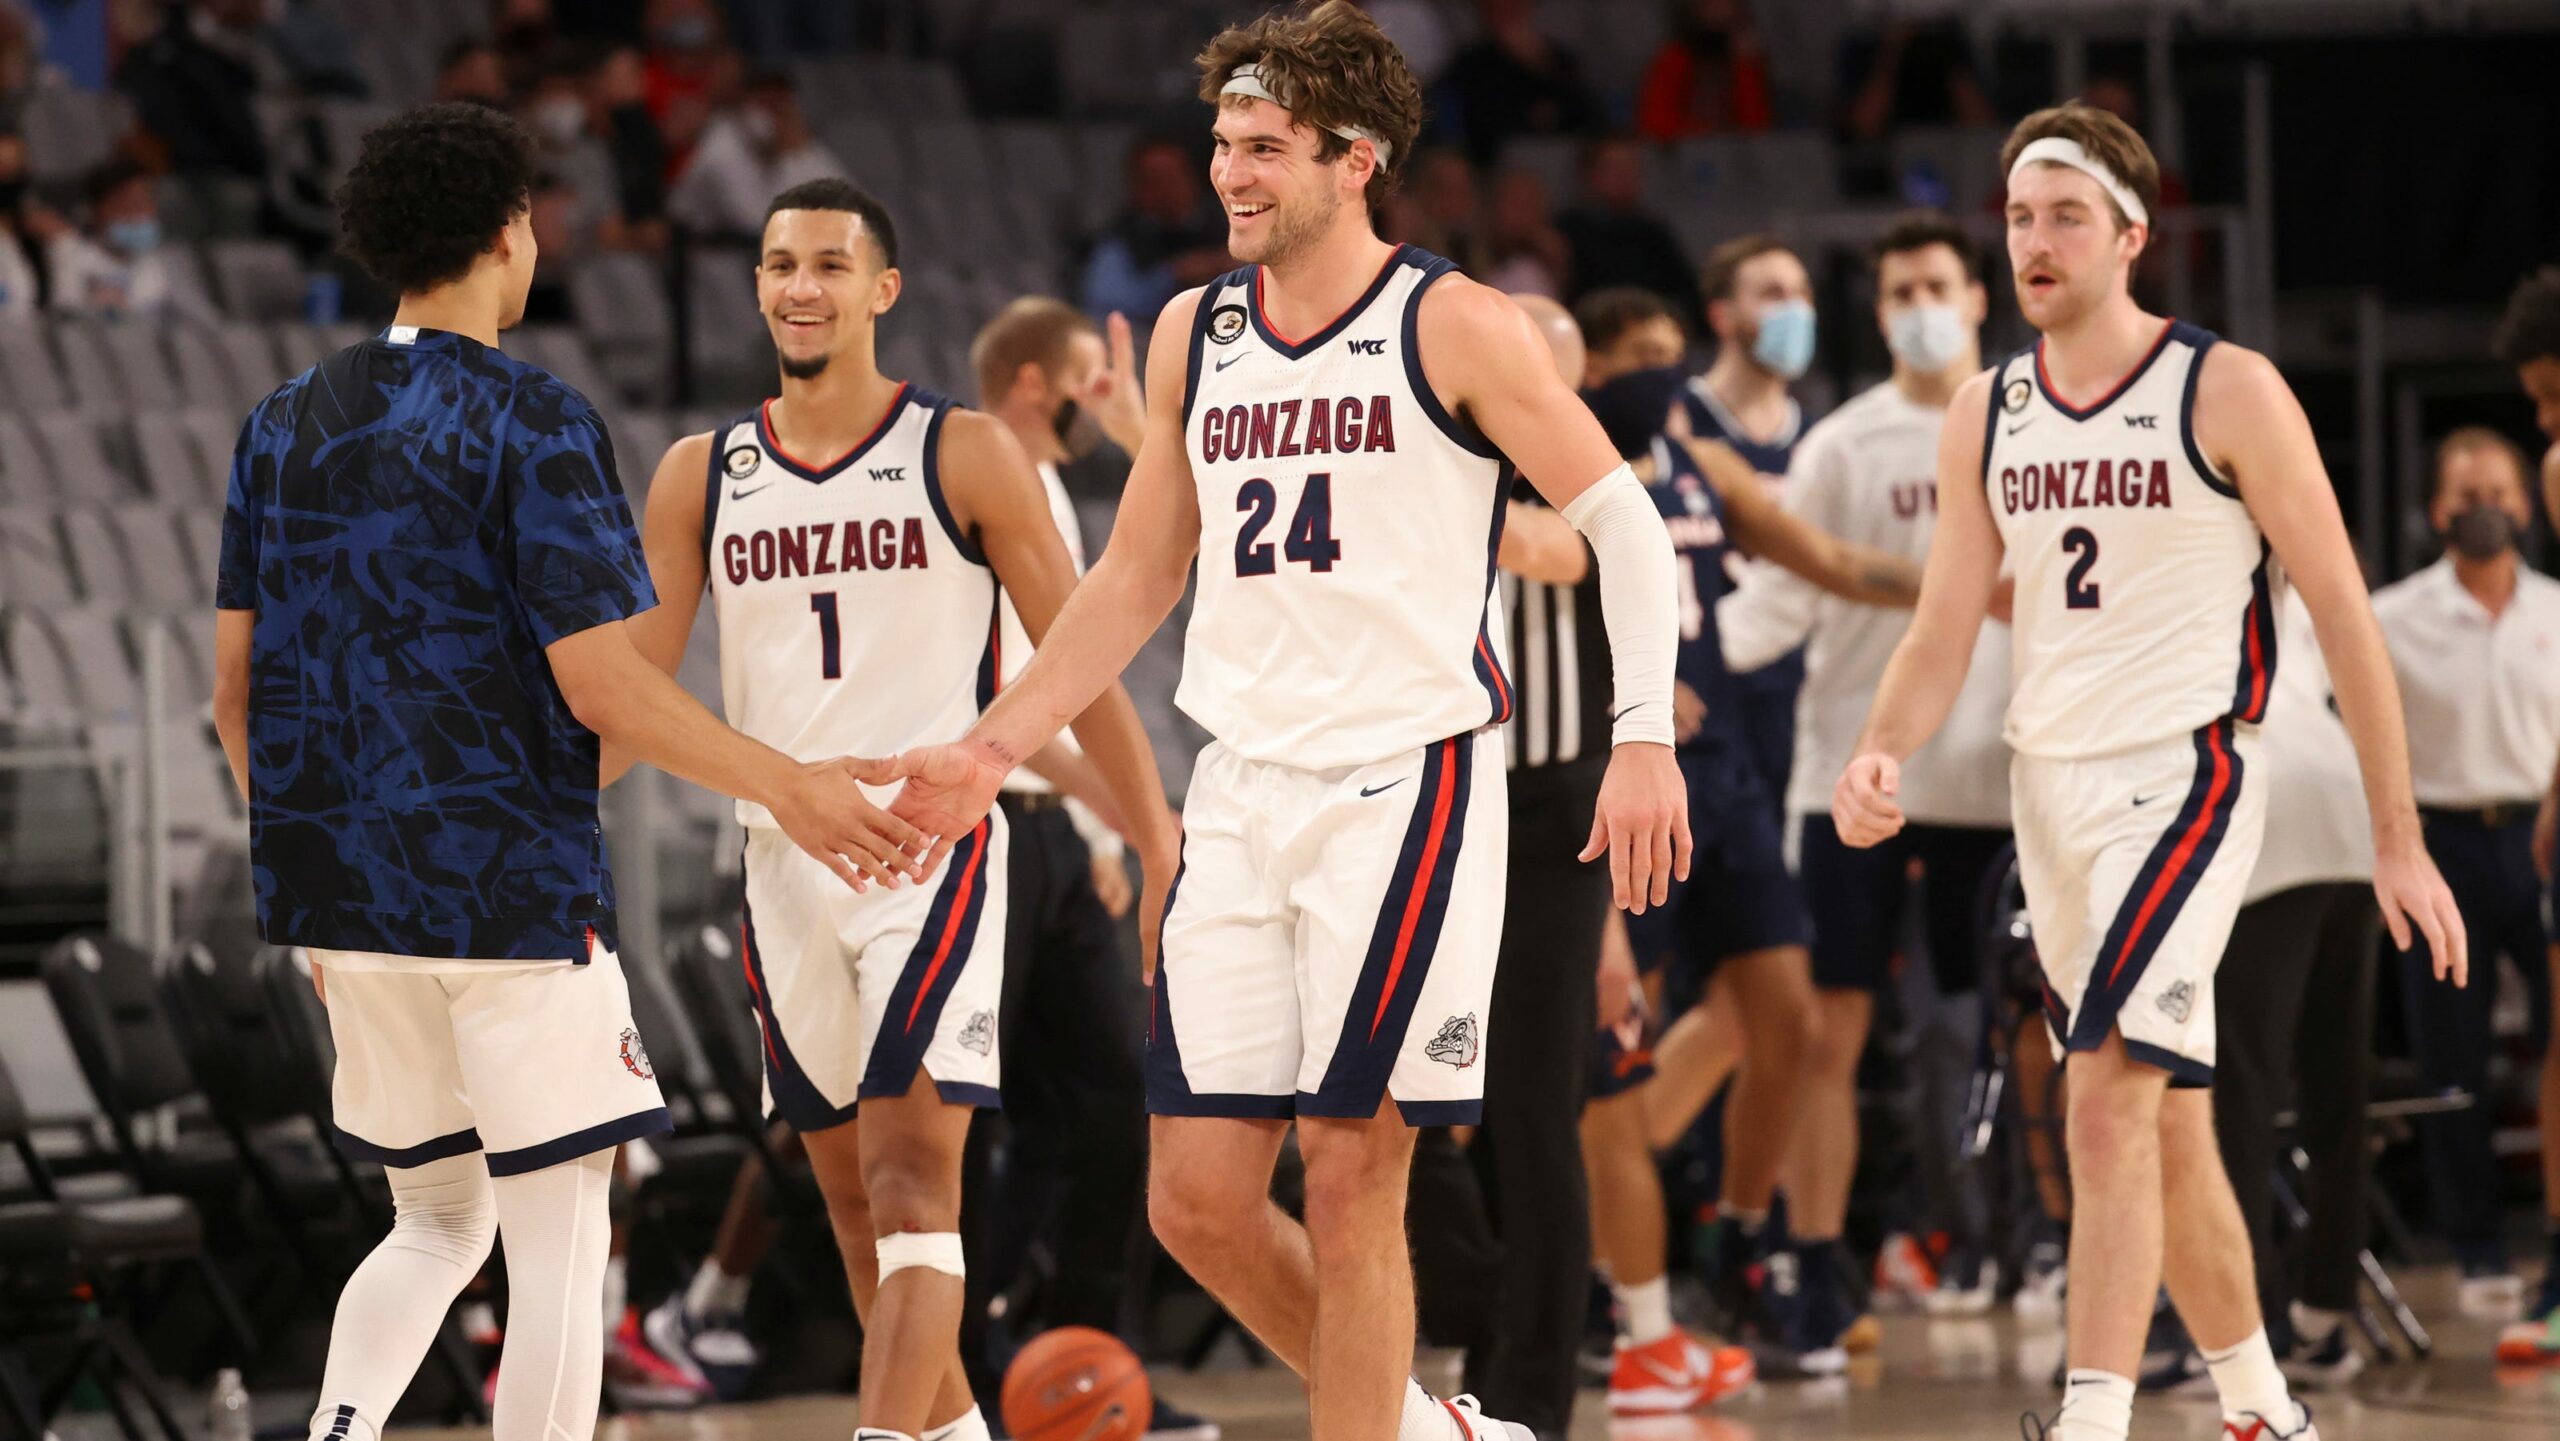 Unstoppable Gonzaga: How One Team Continues To Dominate The Court